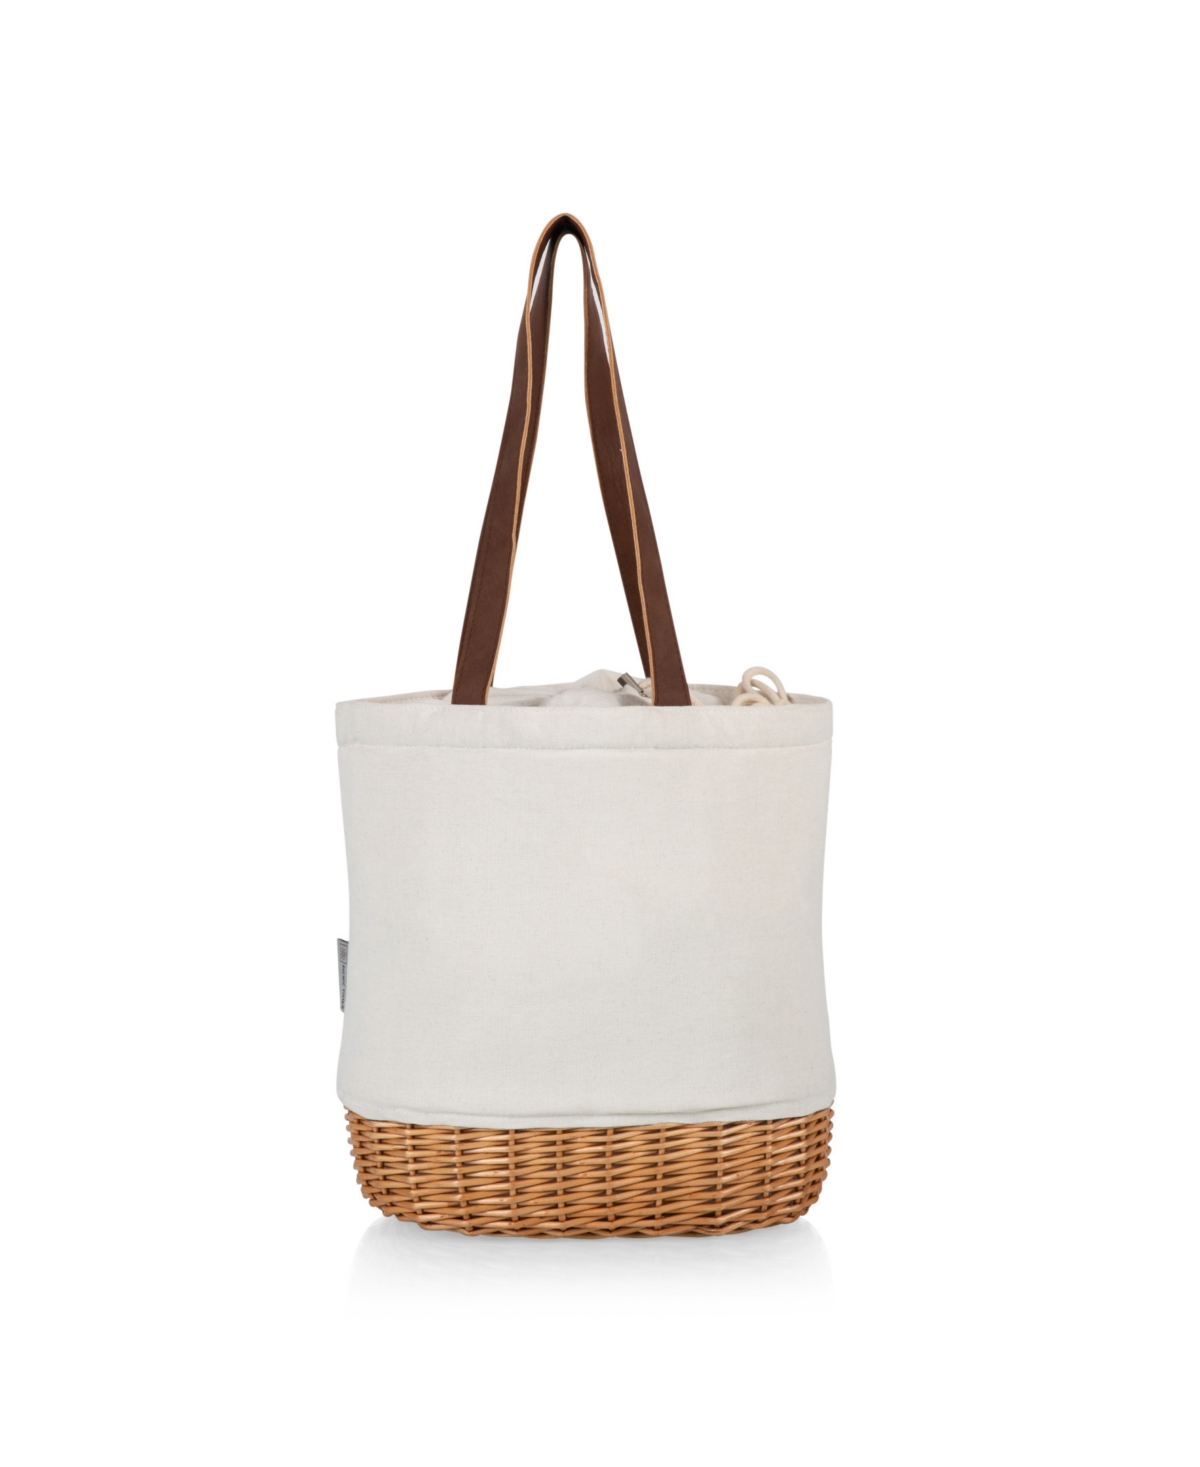 Picnic Time Pico Willow And Canvas Lunch Basket Bag In Natural Canvas